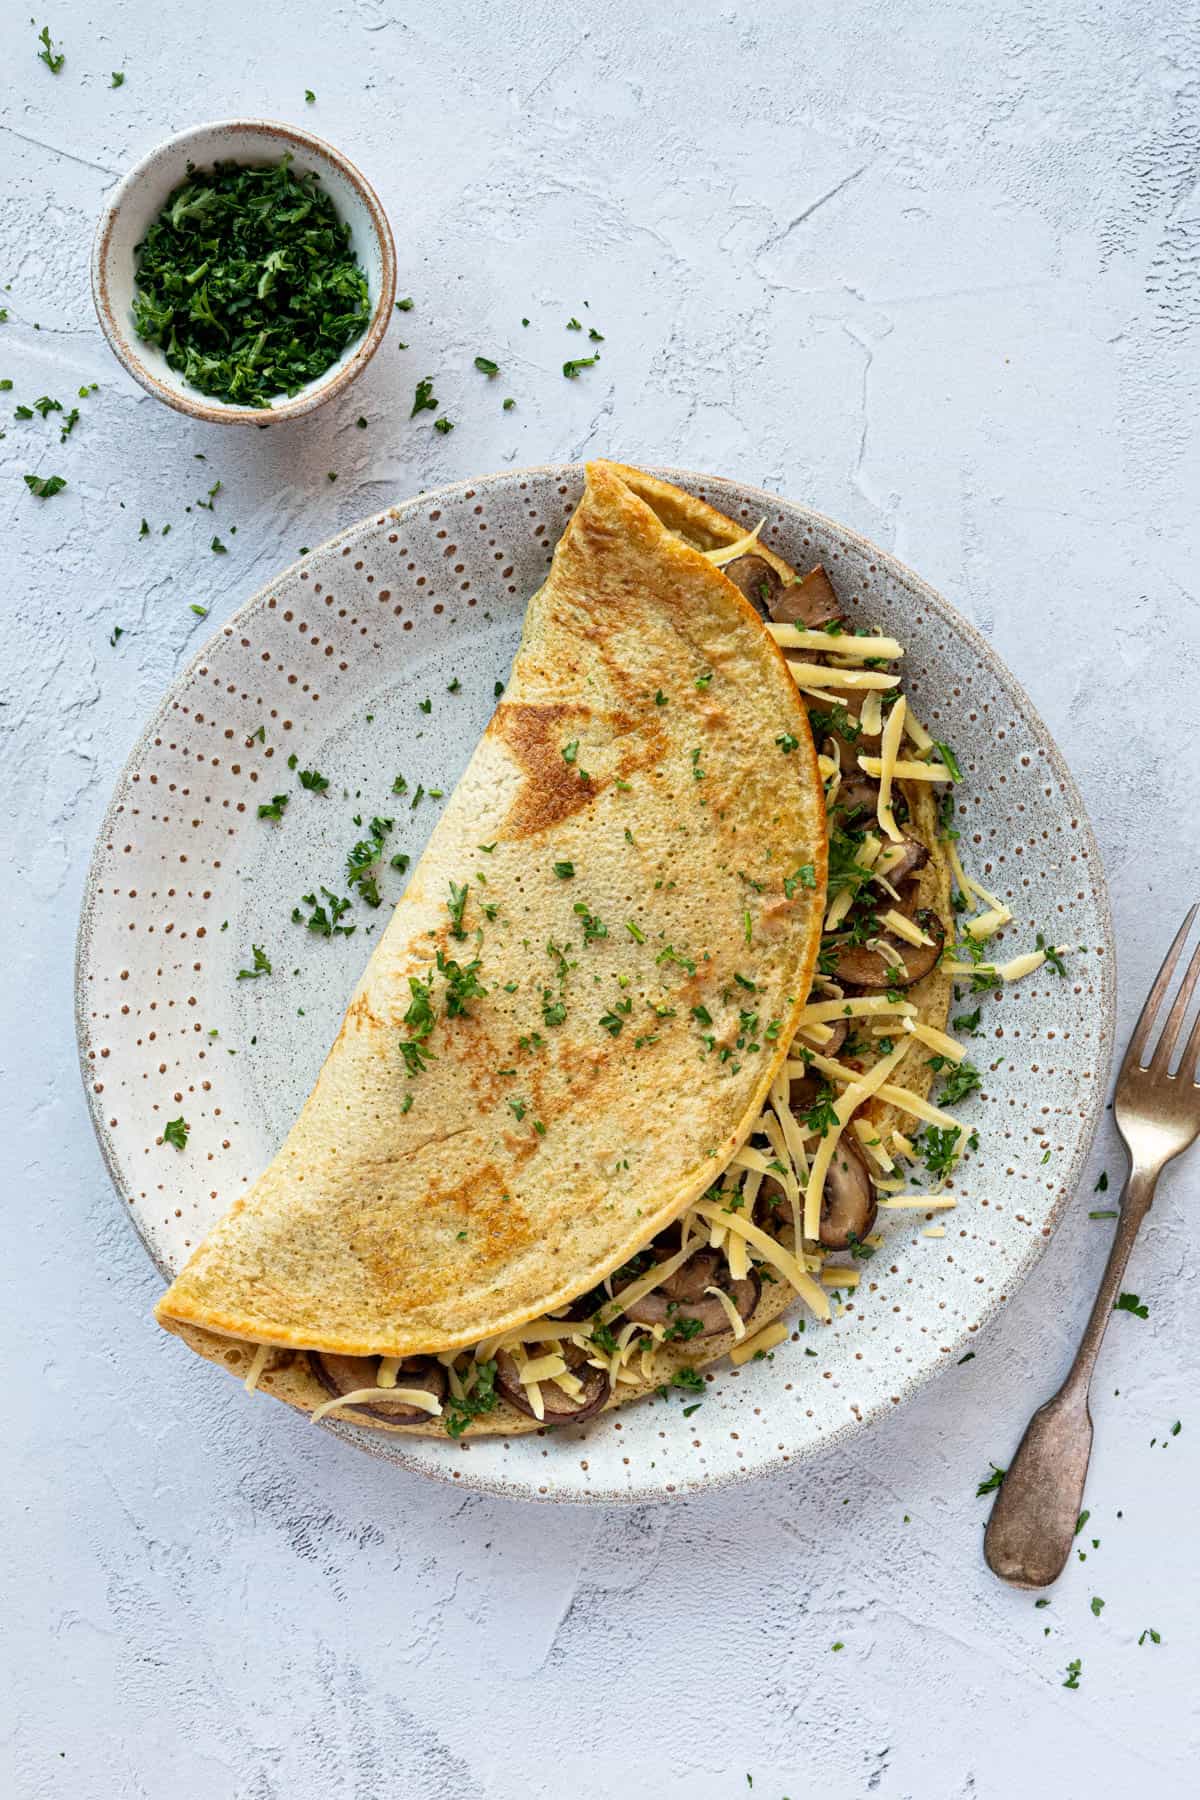 Savoury chickpea pancake filled with mushrooms and vegan cheese on a white plate with a bowl of chopped parsley.